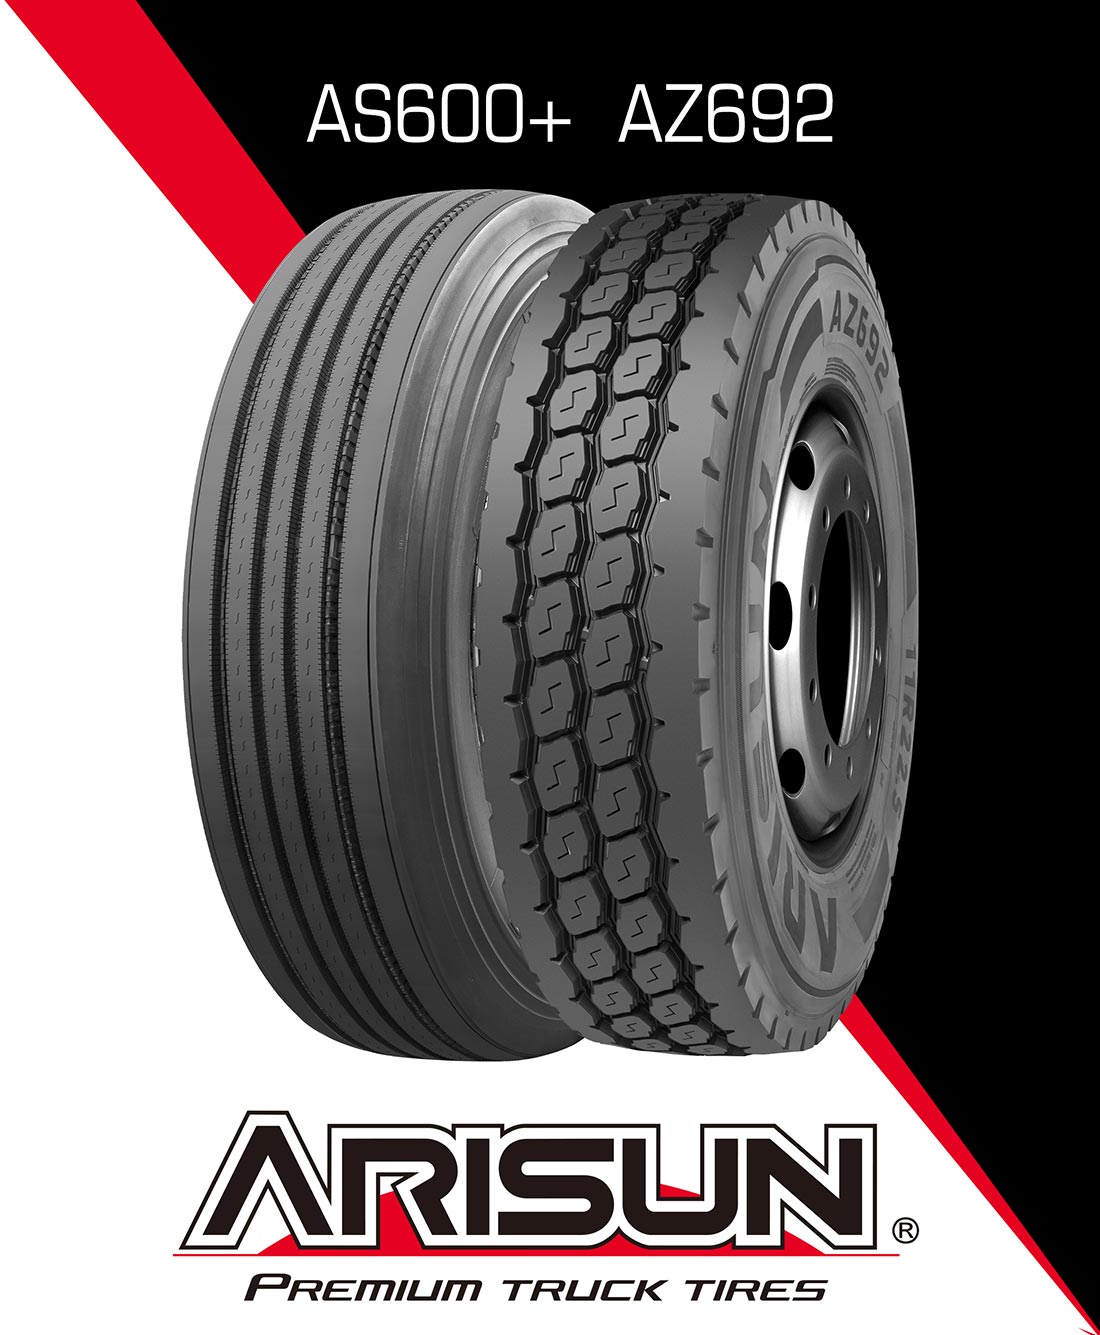 Arisun Launches Two New Premium Commercial Truck Tires